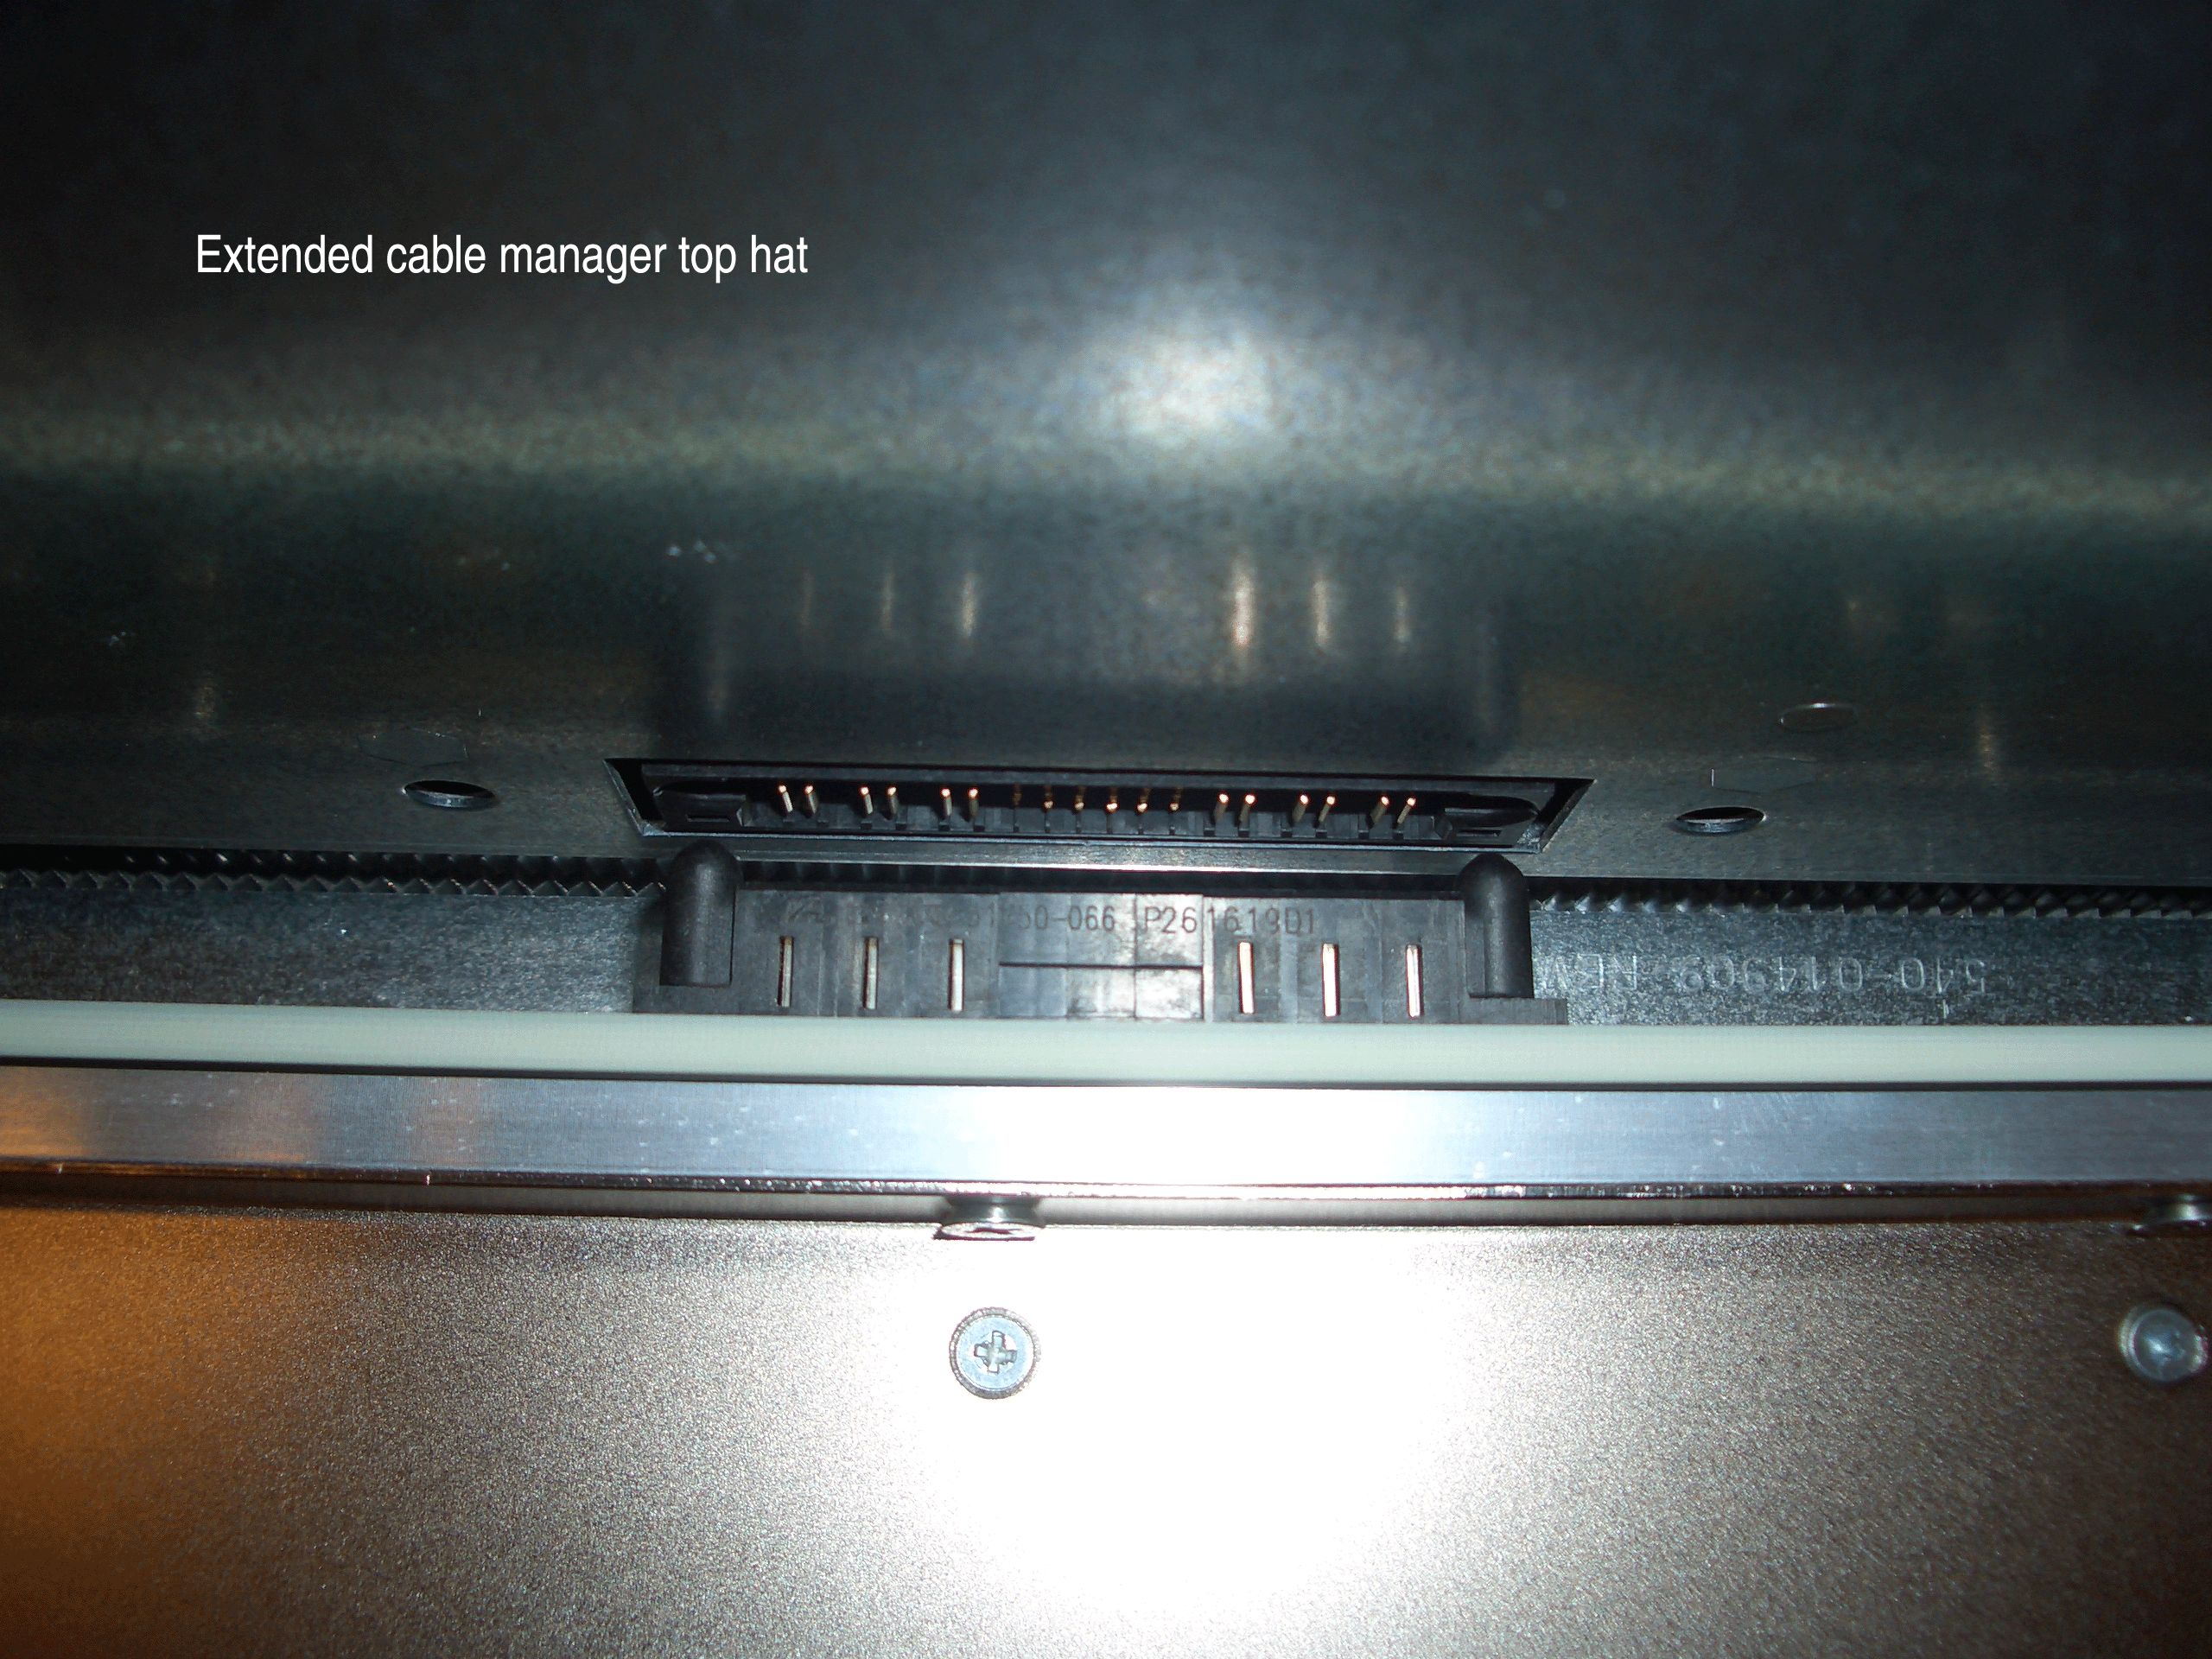 Fan Tray Connector on Extended Cable Manager Top Hat